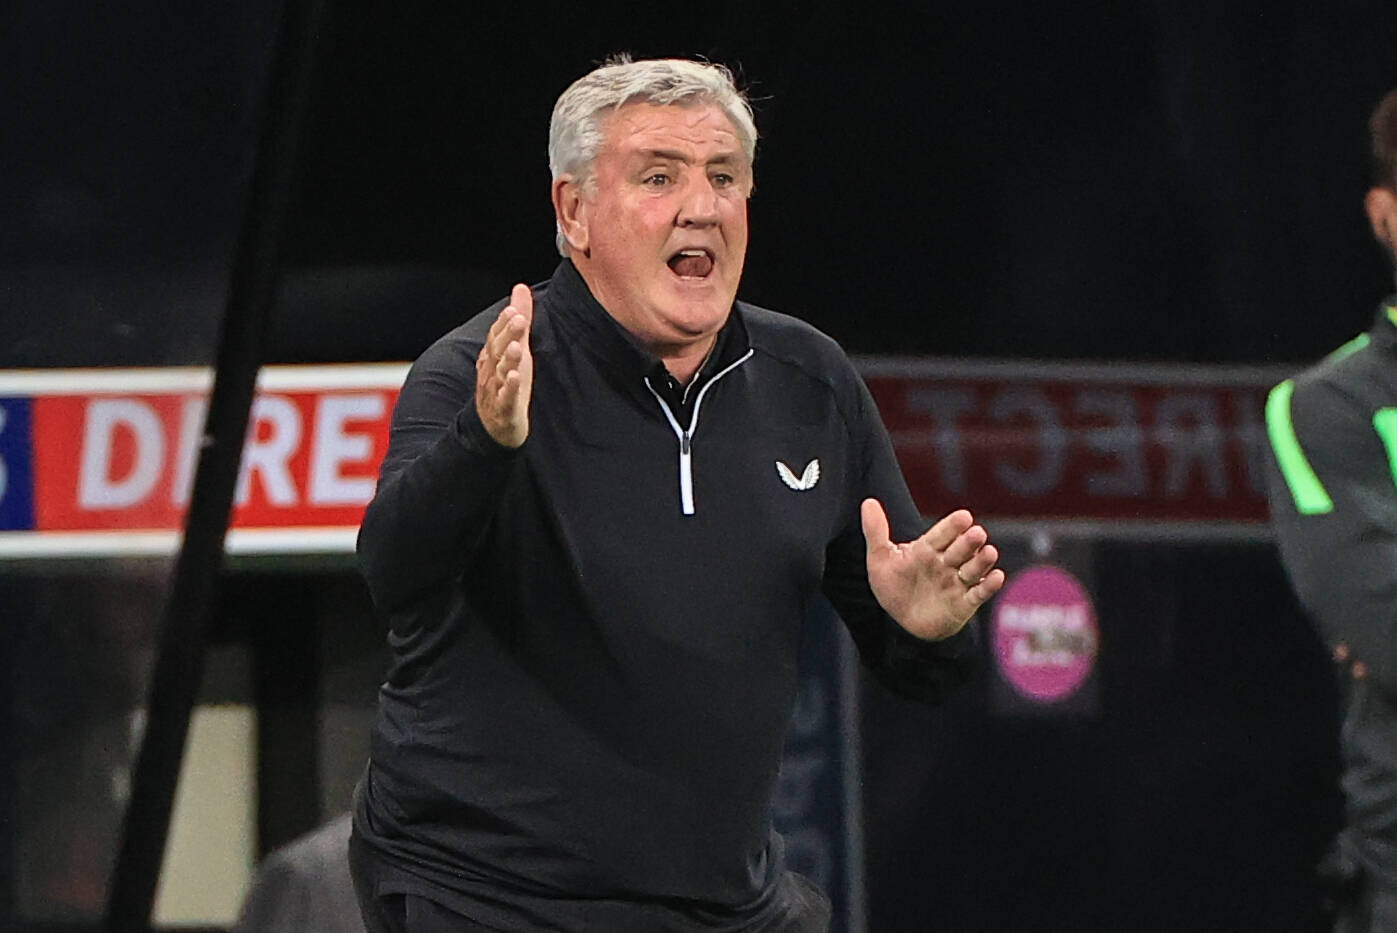  Former Newcastle United manager Steve Bruce is in talks to takeover the vacant West Brom job